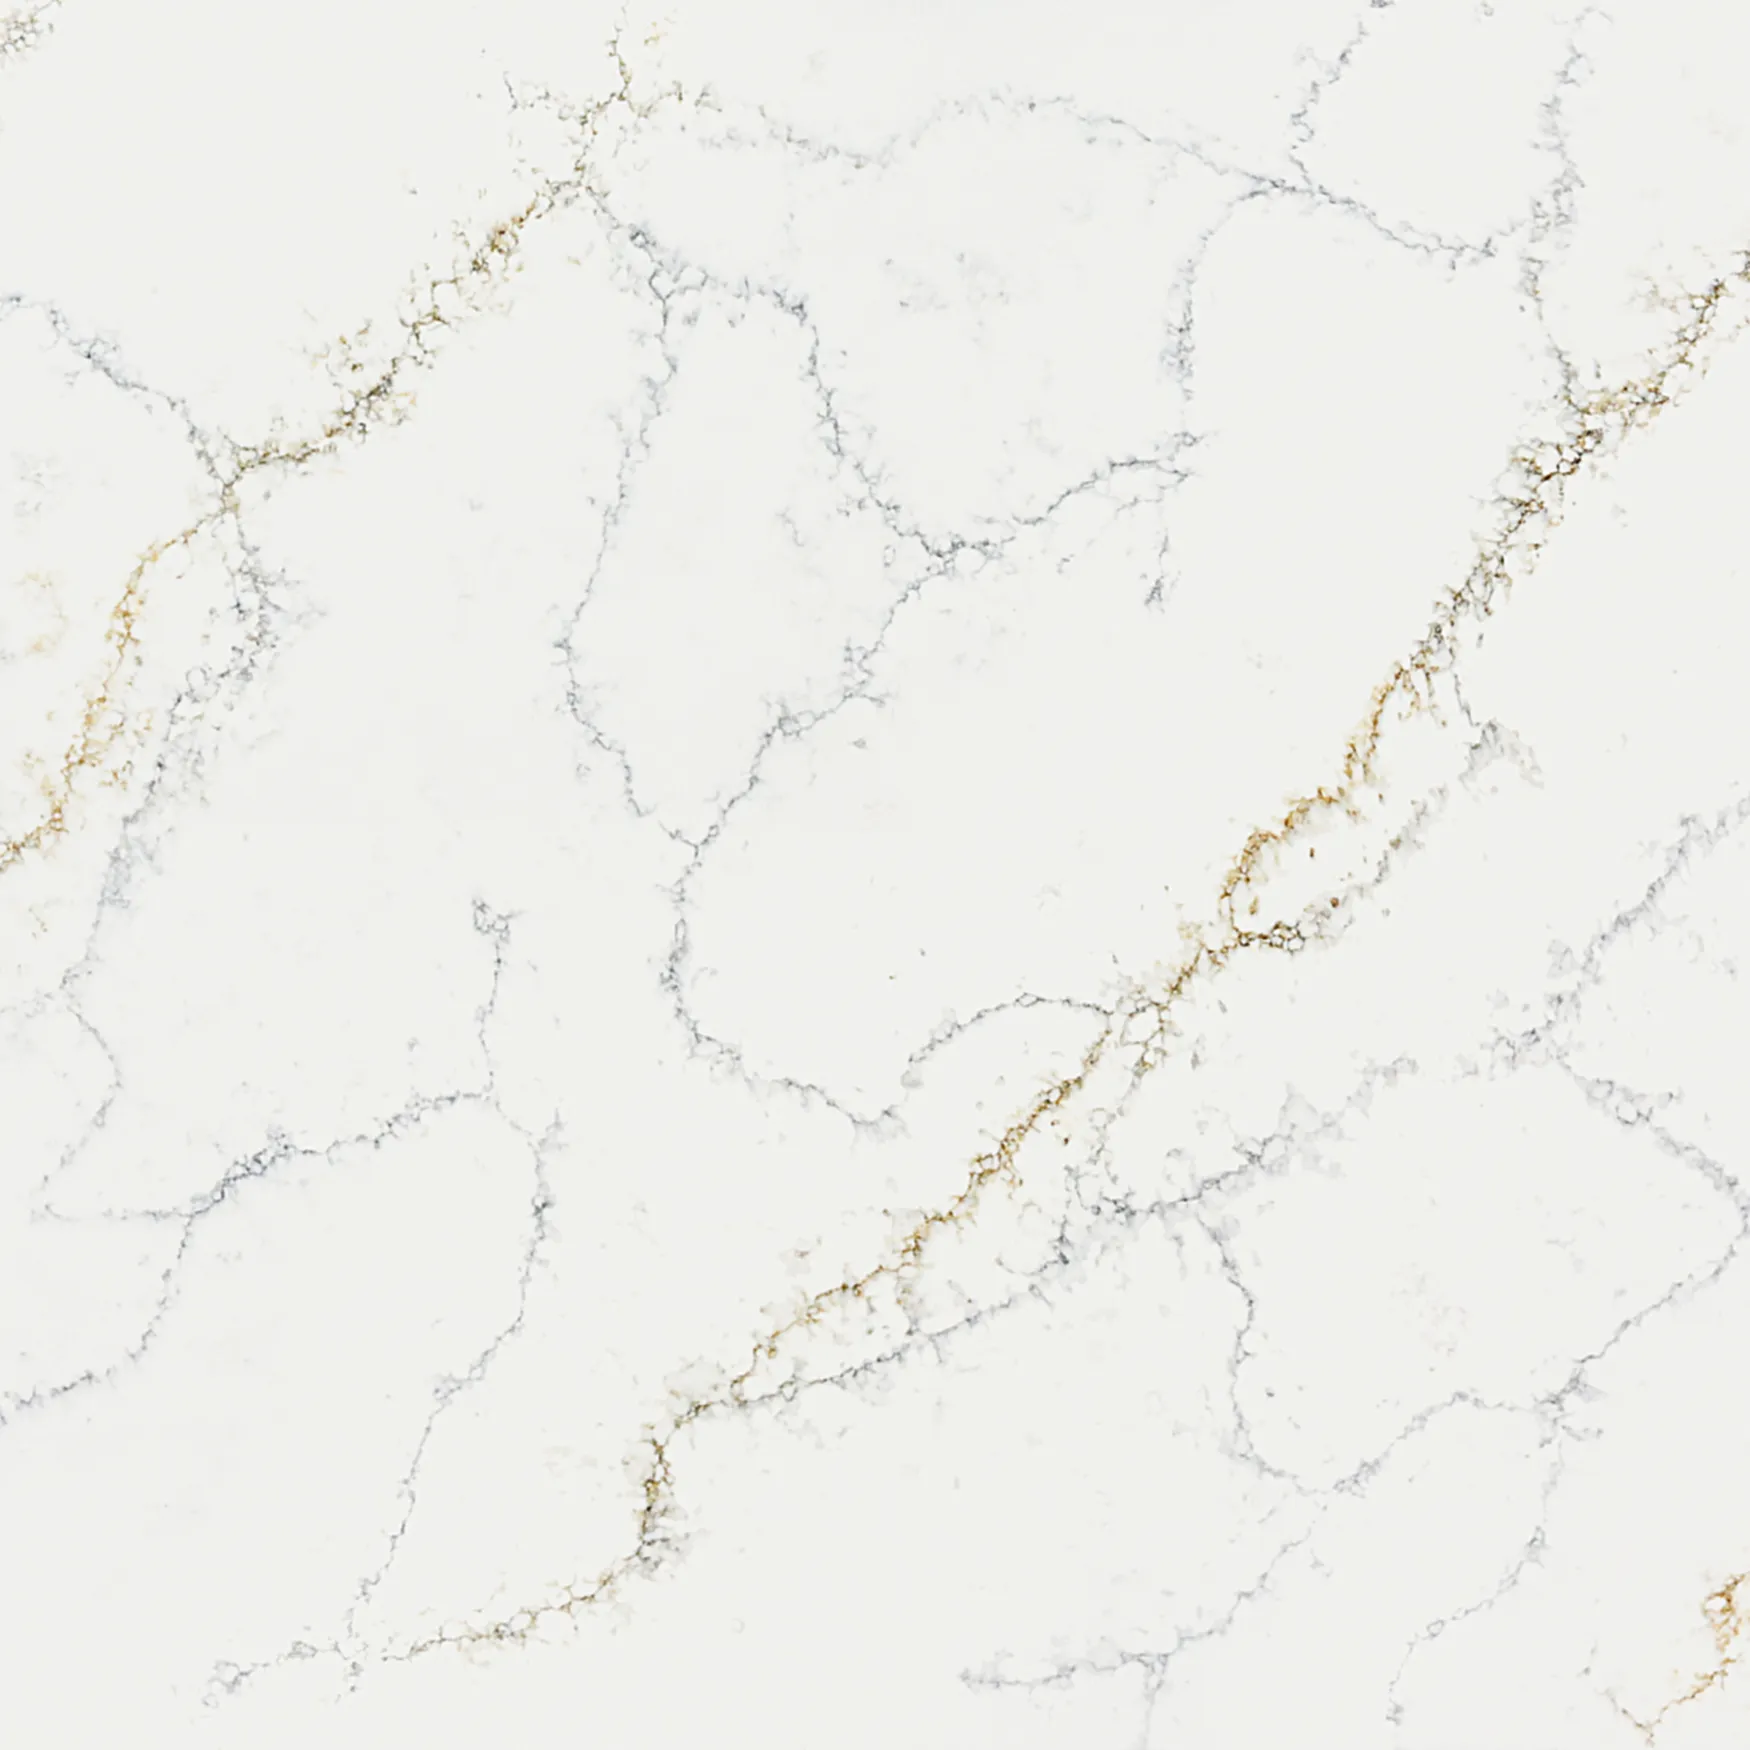 Carolina Carrara Gold artificial white quartz stone with black and gold veins for countertops in high quality